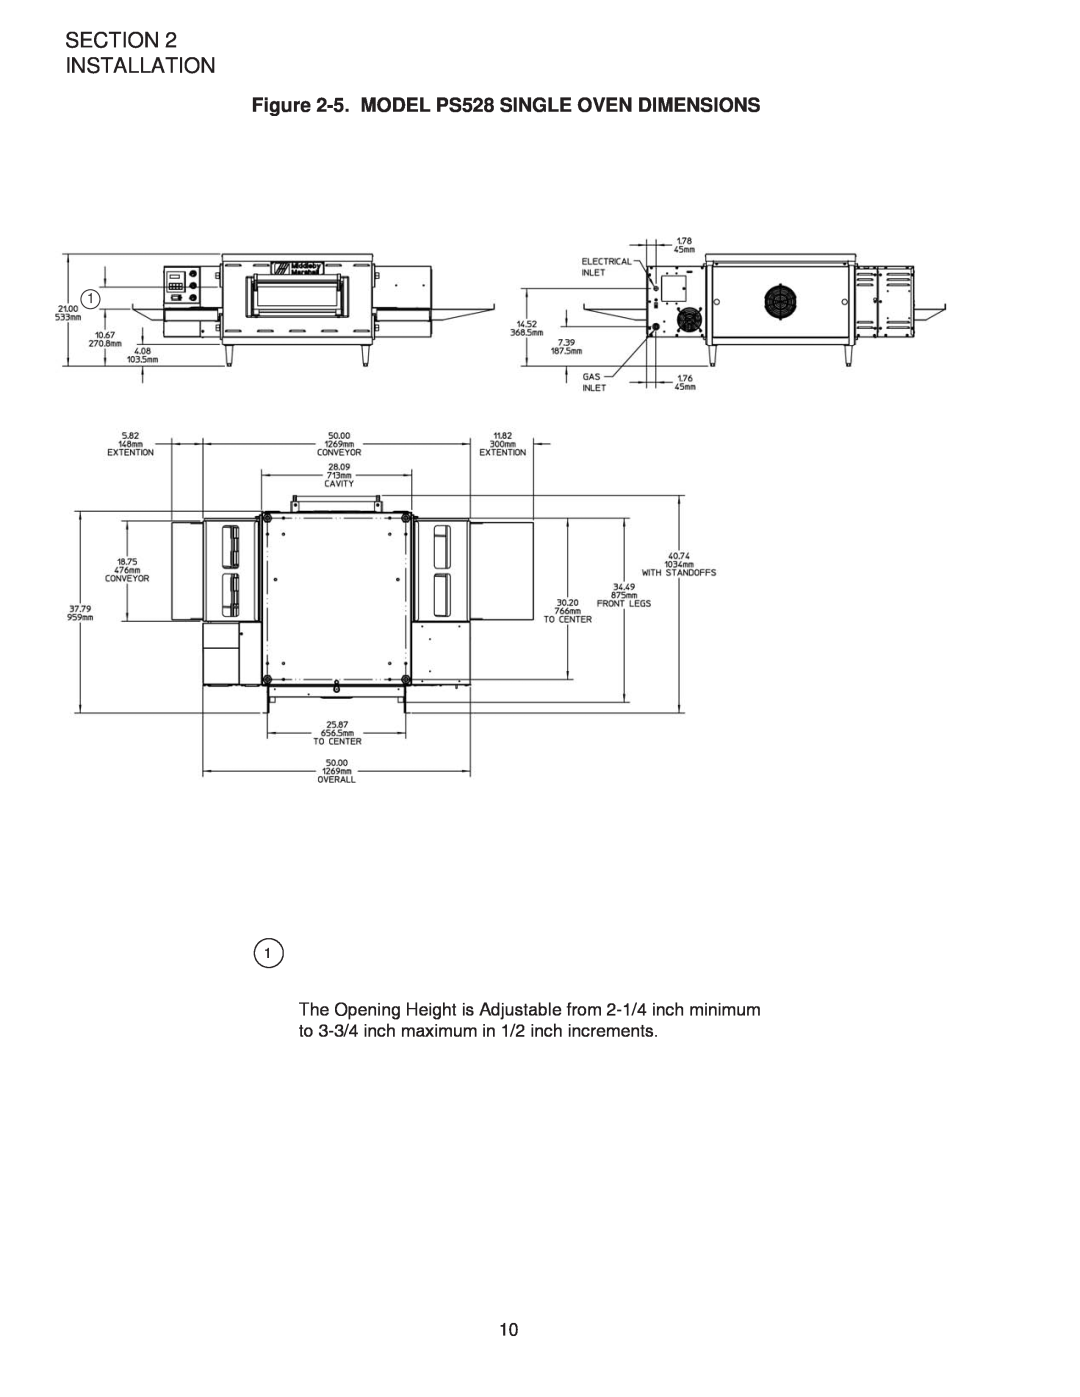 Middleby Marshall PS528G installation manual Section Installation, 5. MODEL PS528 SINGLE OVEN DIMENSIONS 